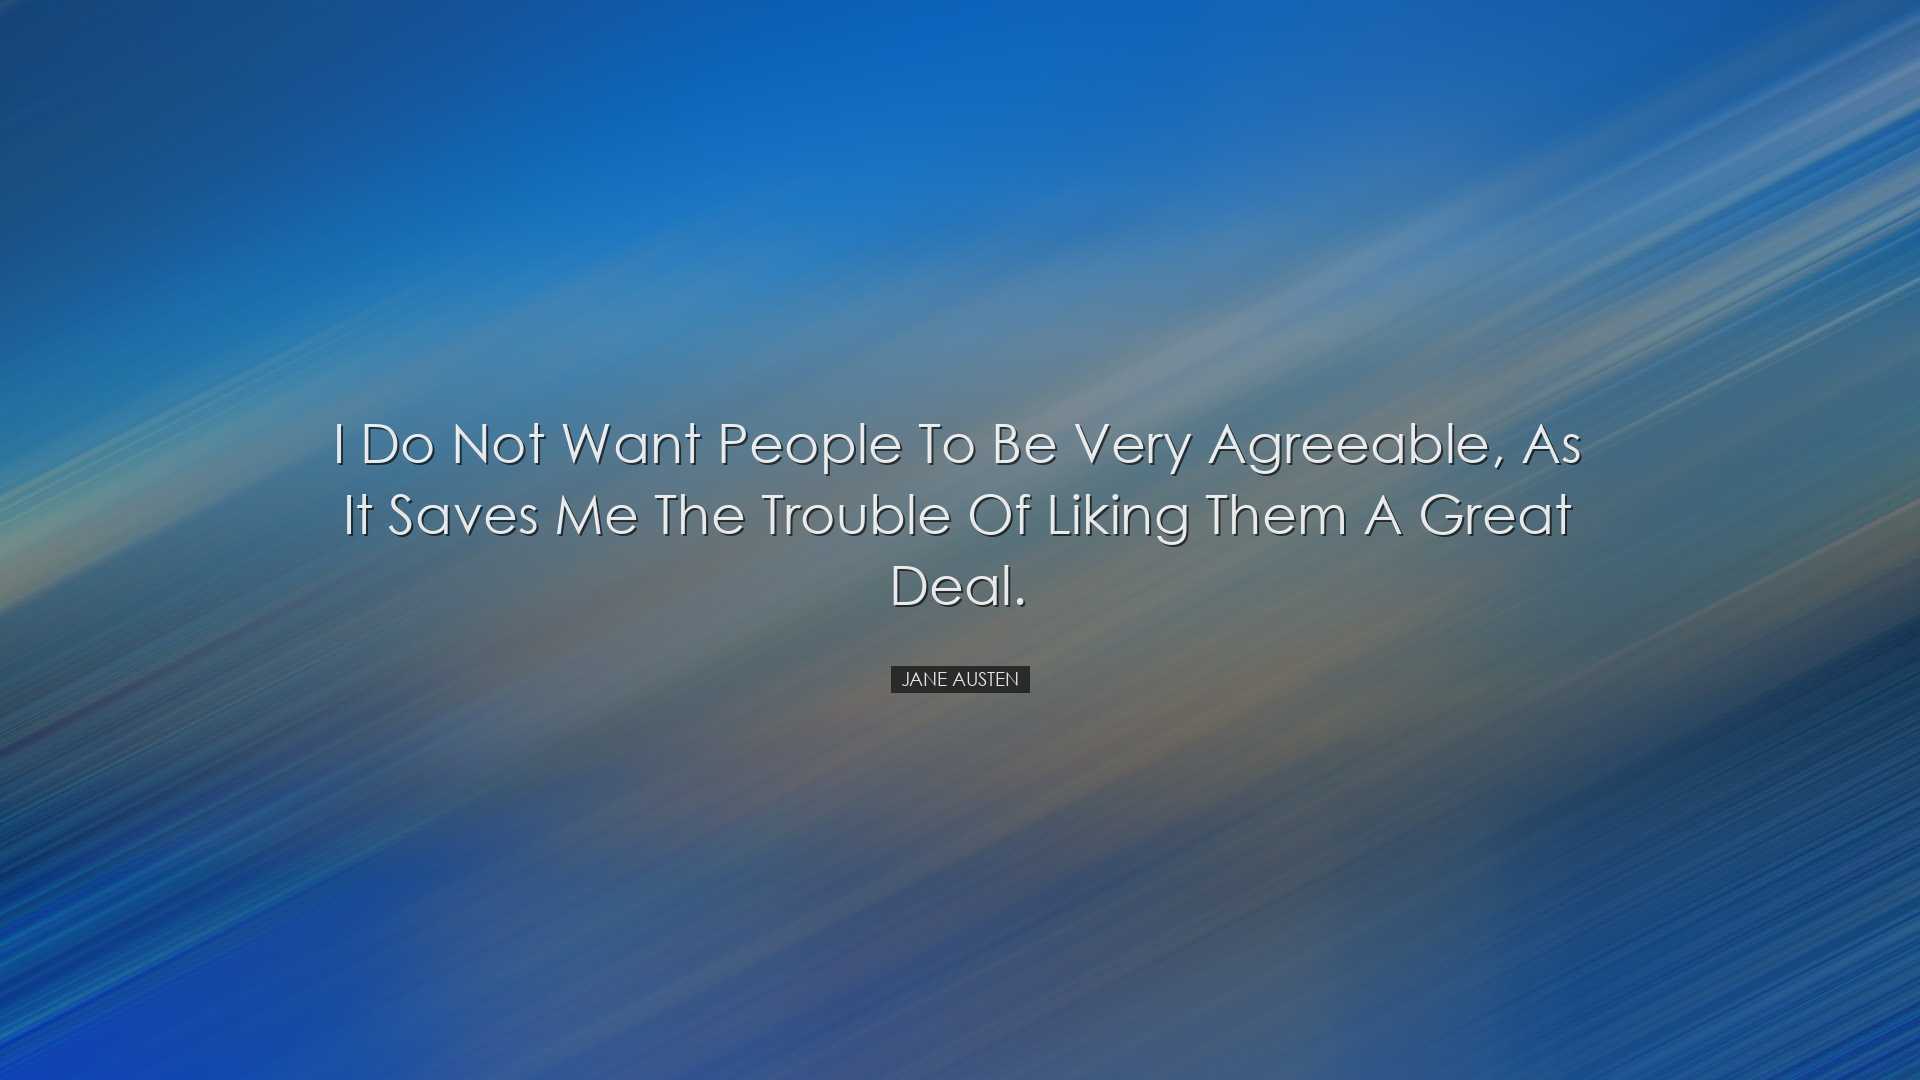 I do not want people to be very agreeable, as it saves me the trou